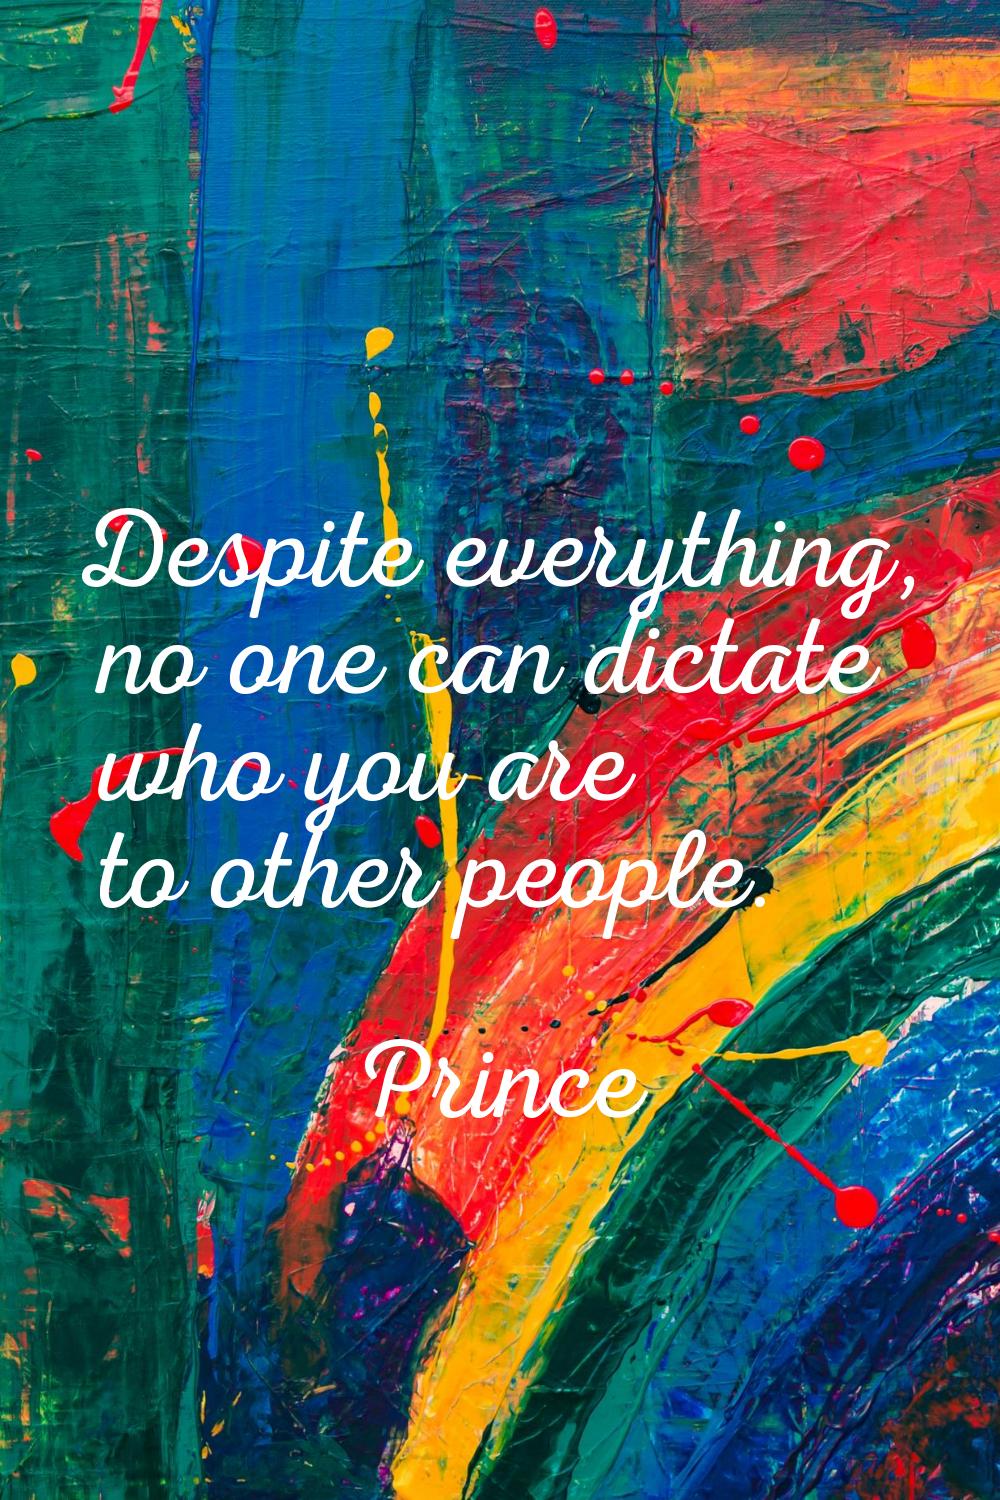 Despite everything, no one can dictate who you are to other people.